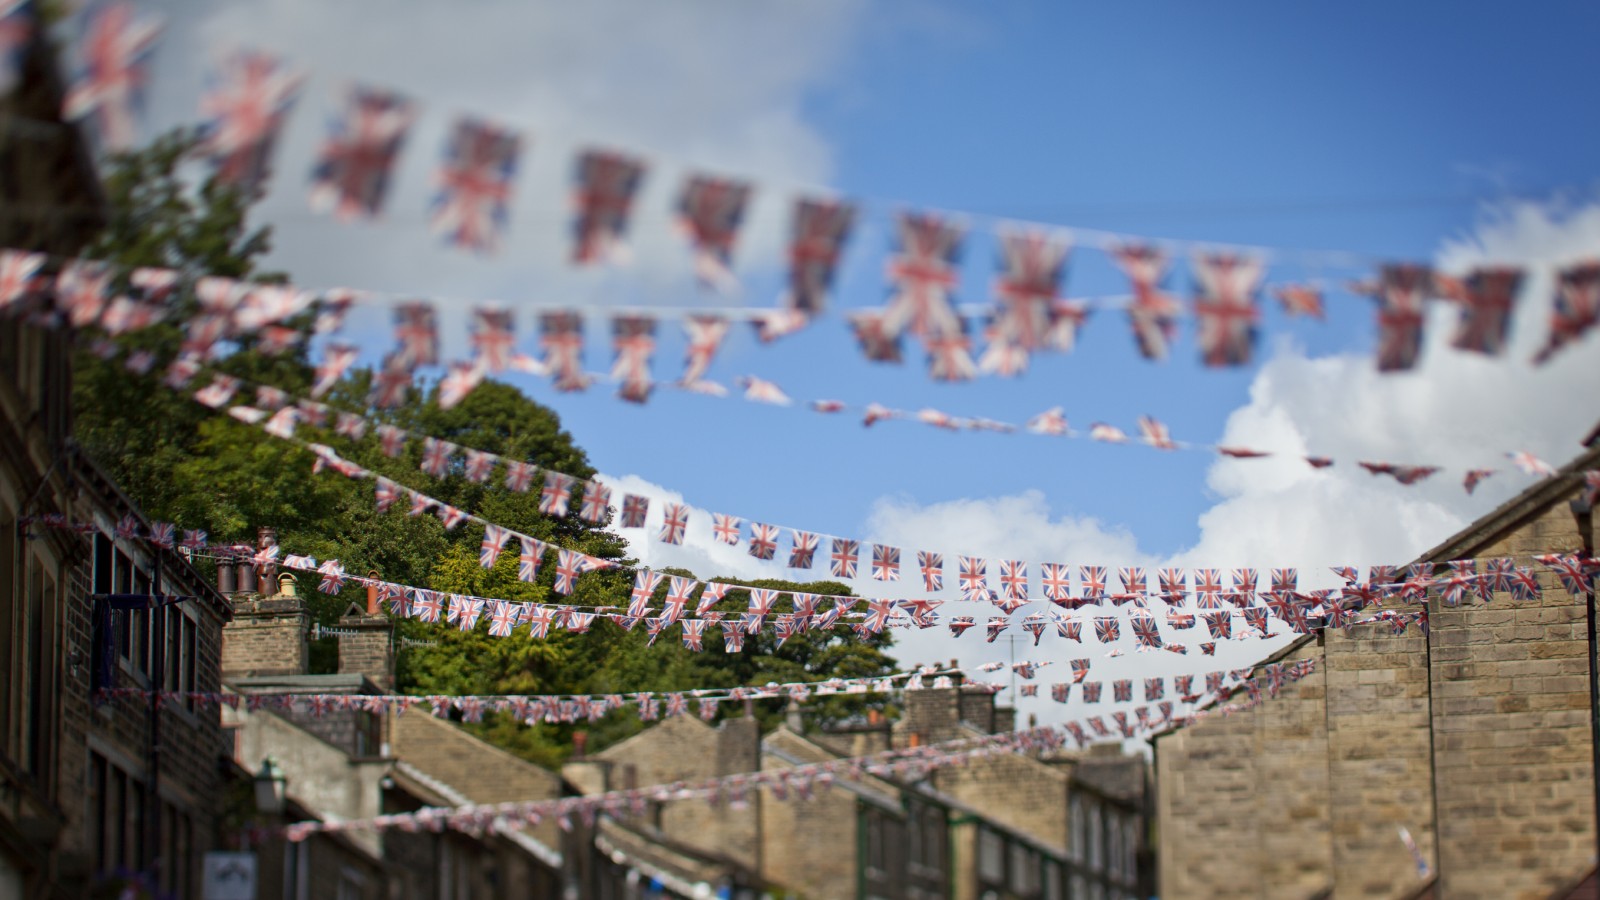 Town with British flag bunting